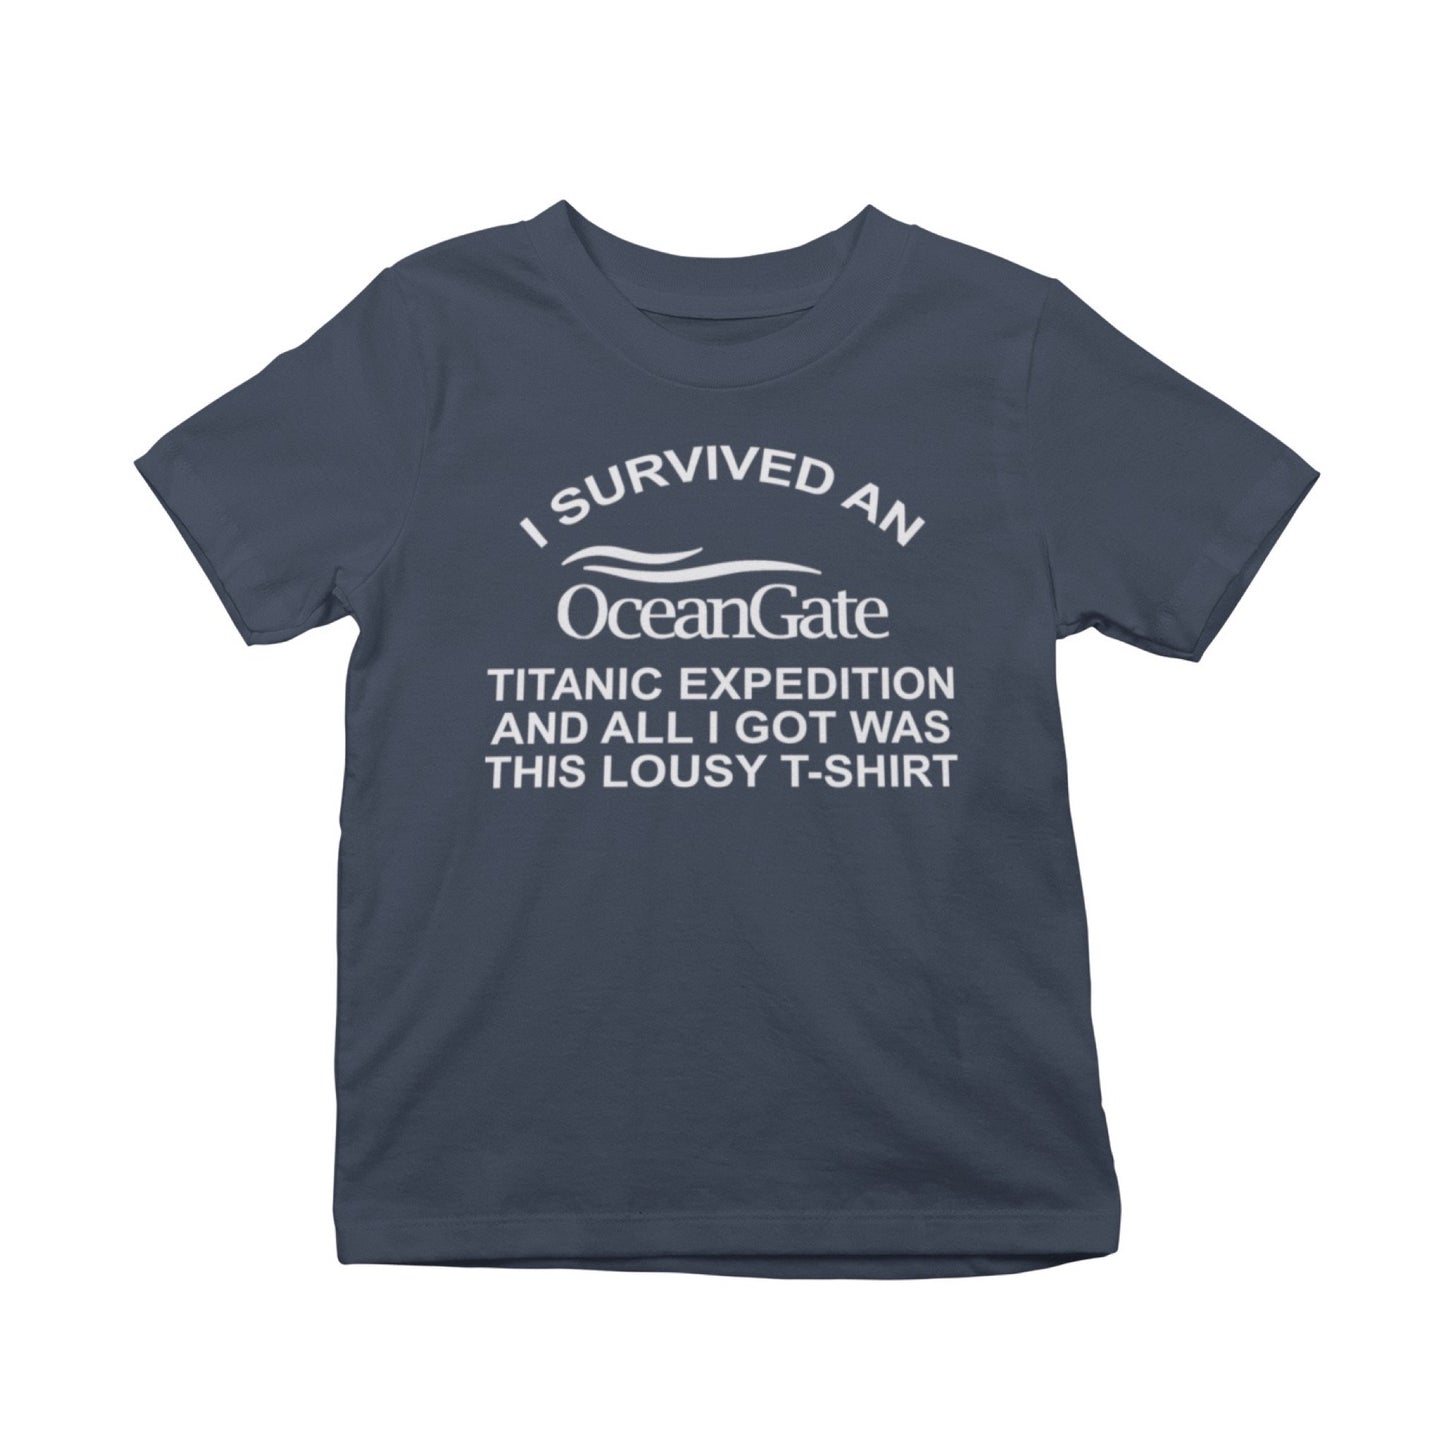 I Survived An OceanGate Titanic Expedition And All I Got Was This Lousy T-Shirt